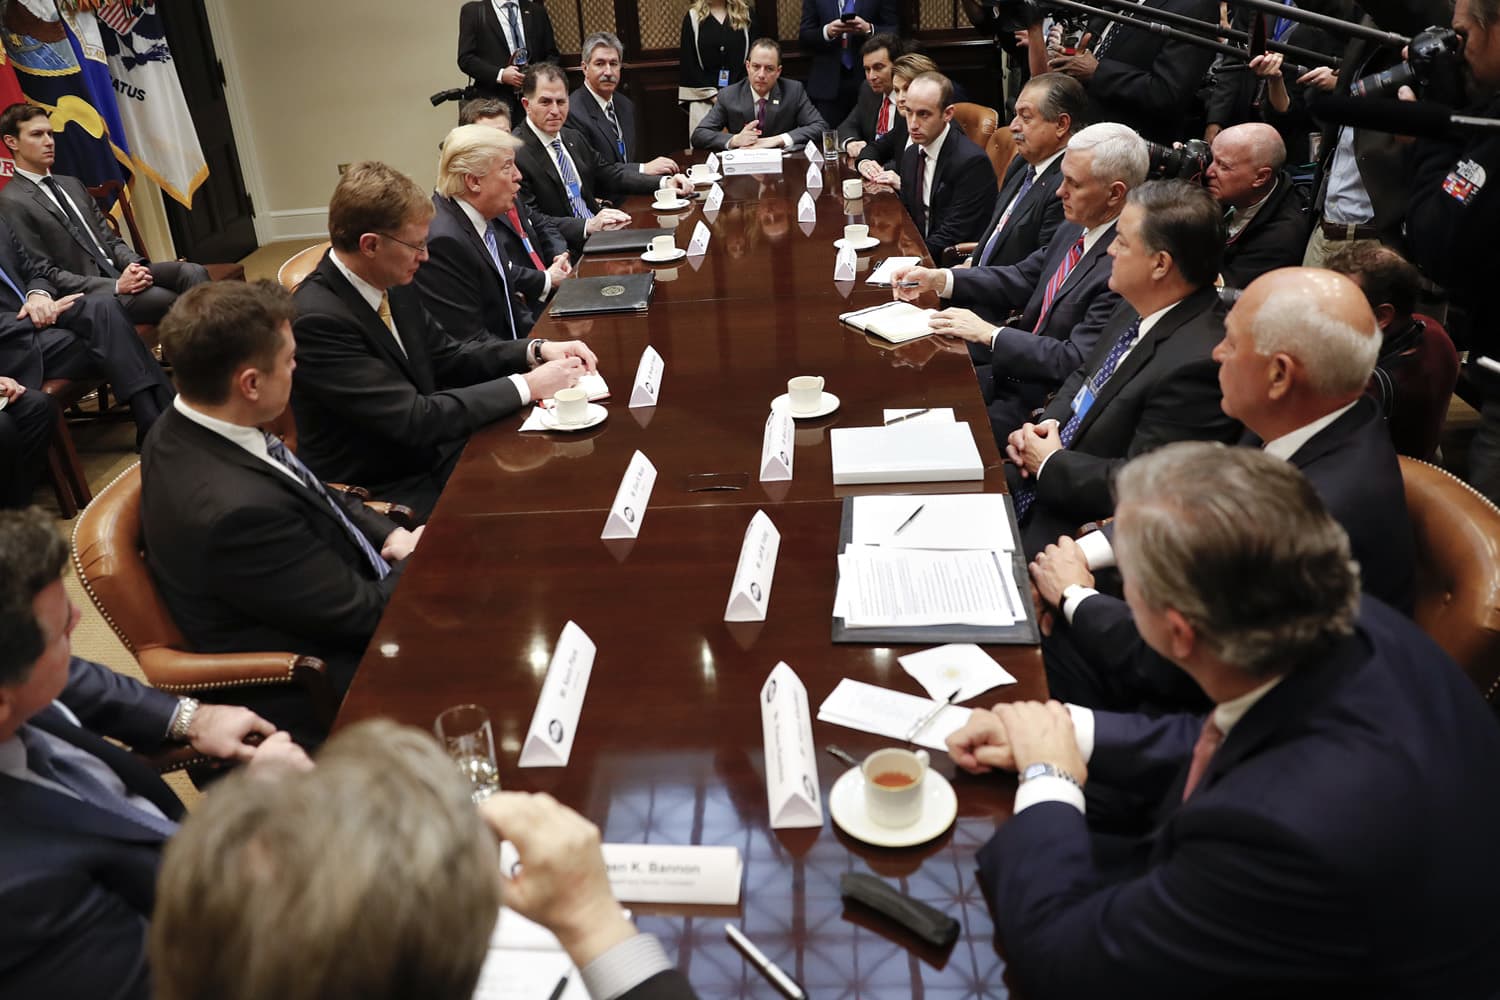 President Donald Trump, left center, host breakfast with business leaders in the Roosevelt Room of the White House in Washington. (Pablo Martinez Monsivais/AP)